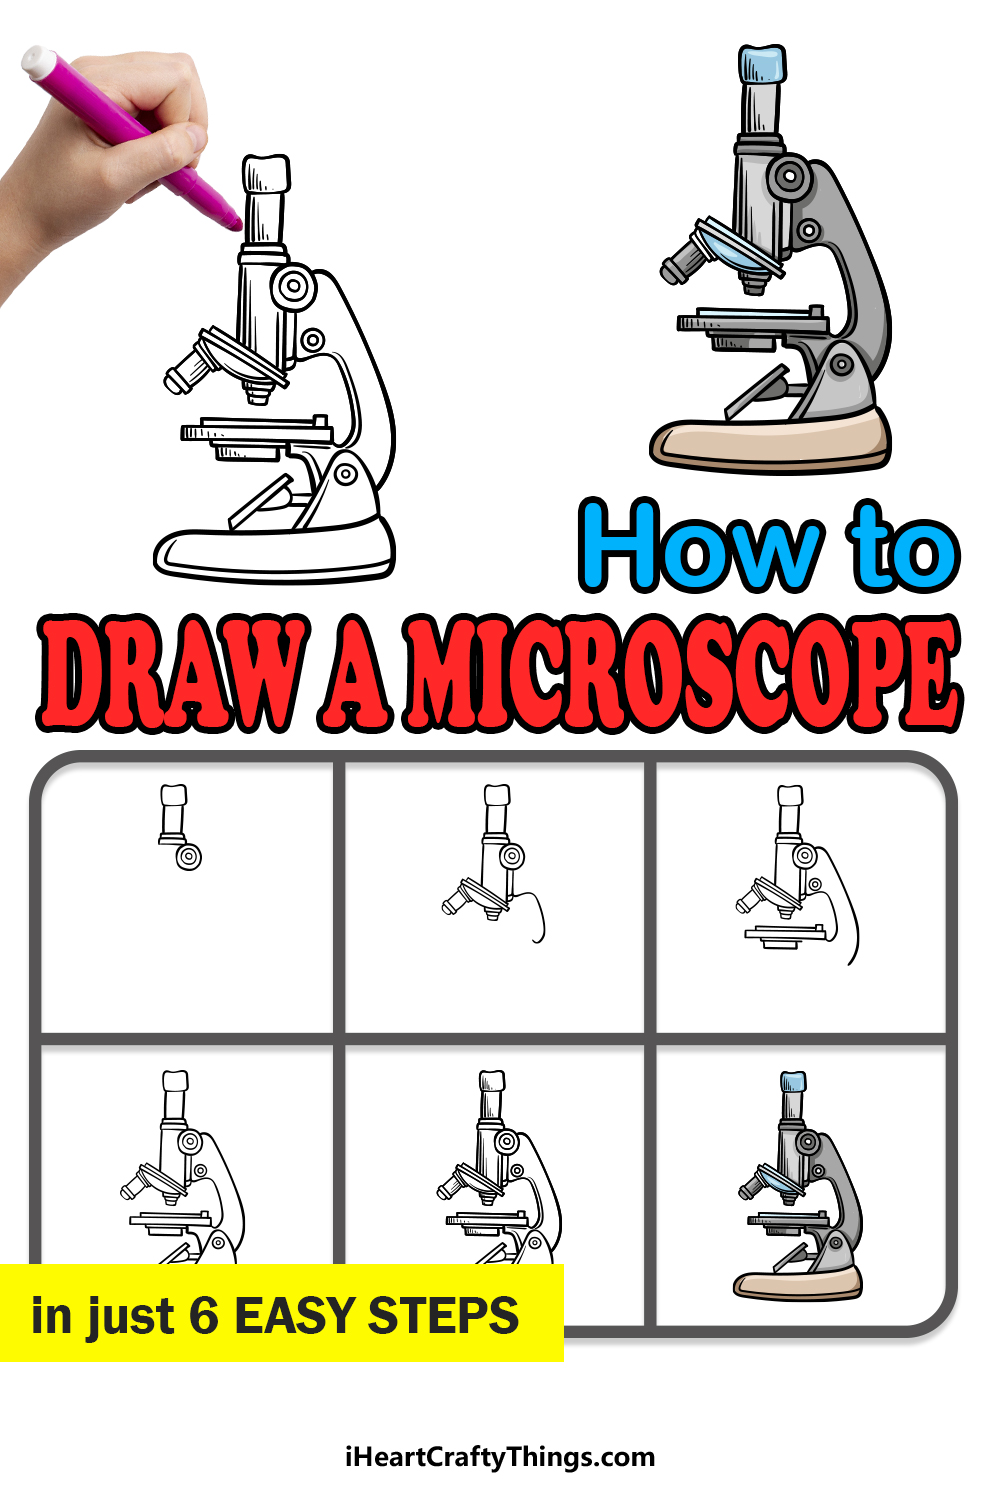 how to draw a microscope in 6 easy steps